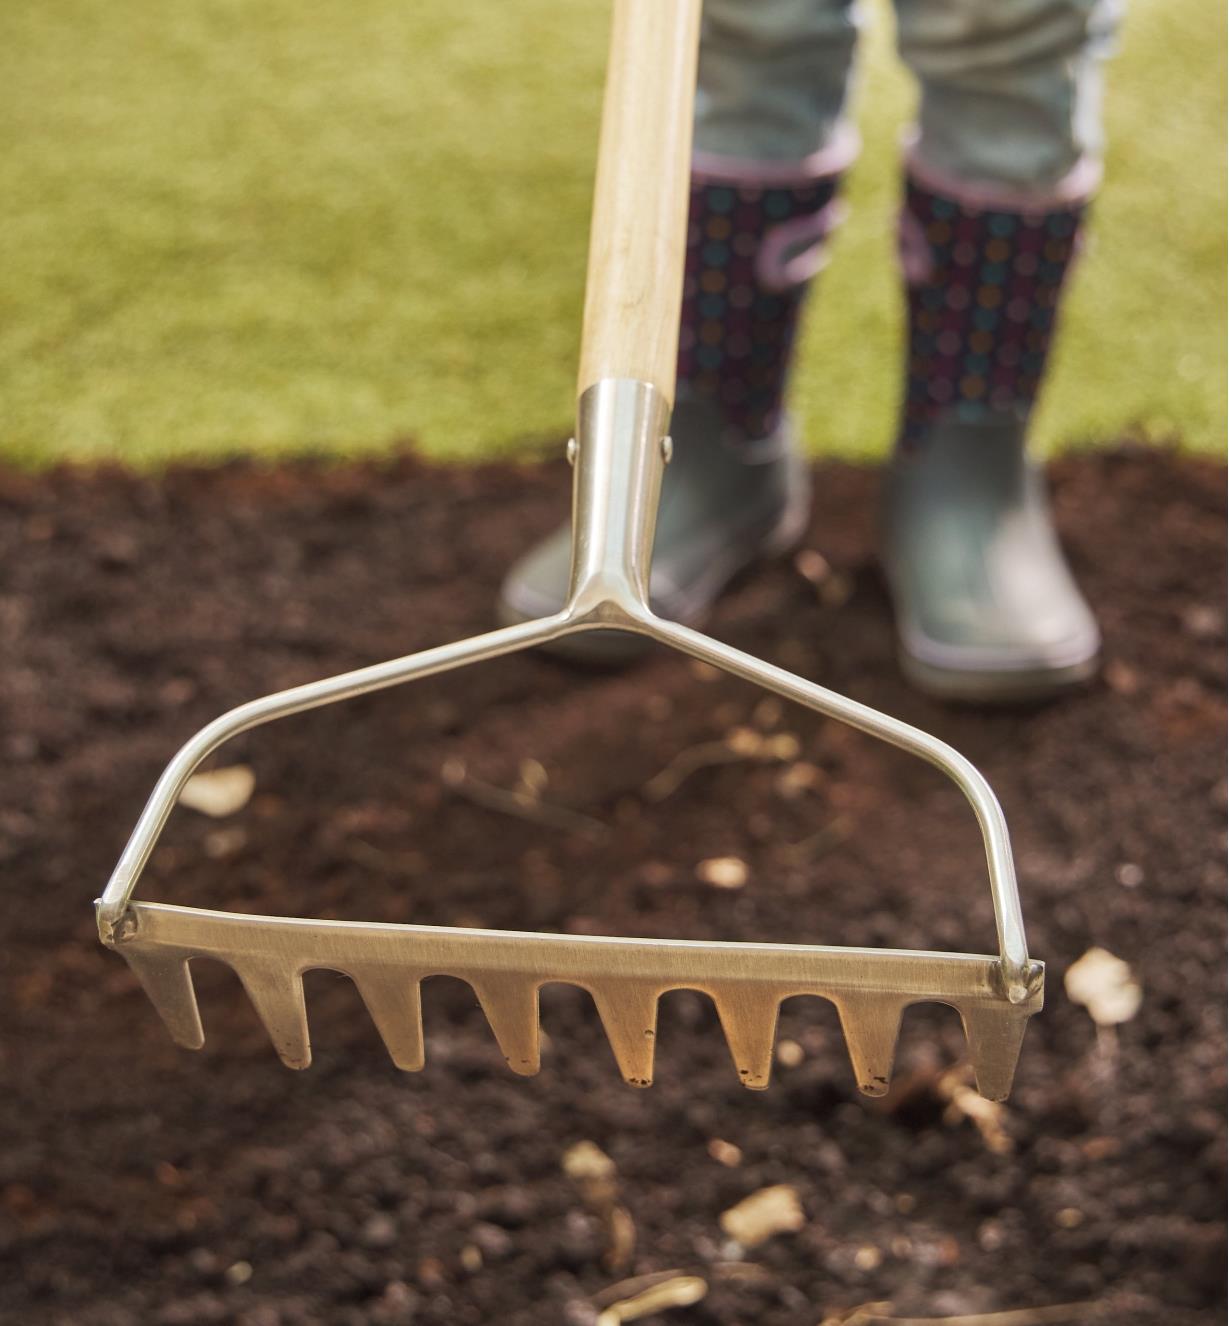 A child uses the children’s rake to move soil outdoors